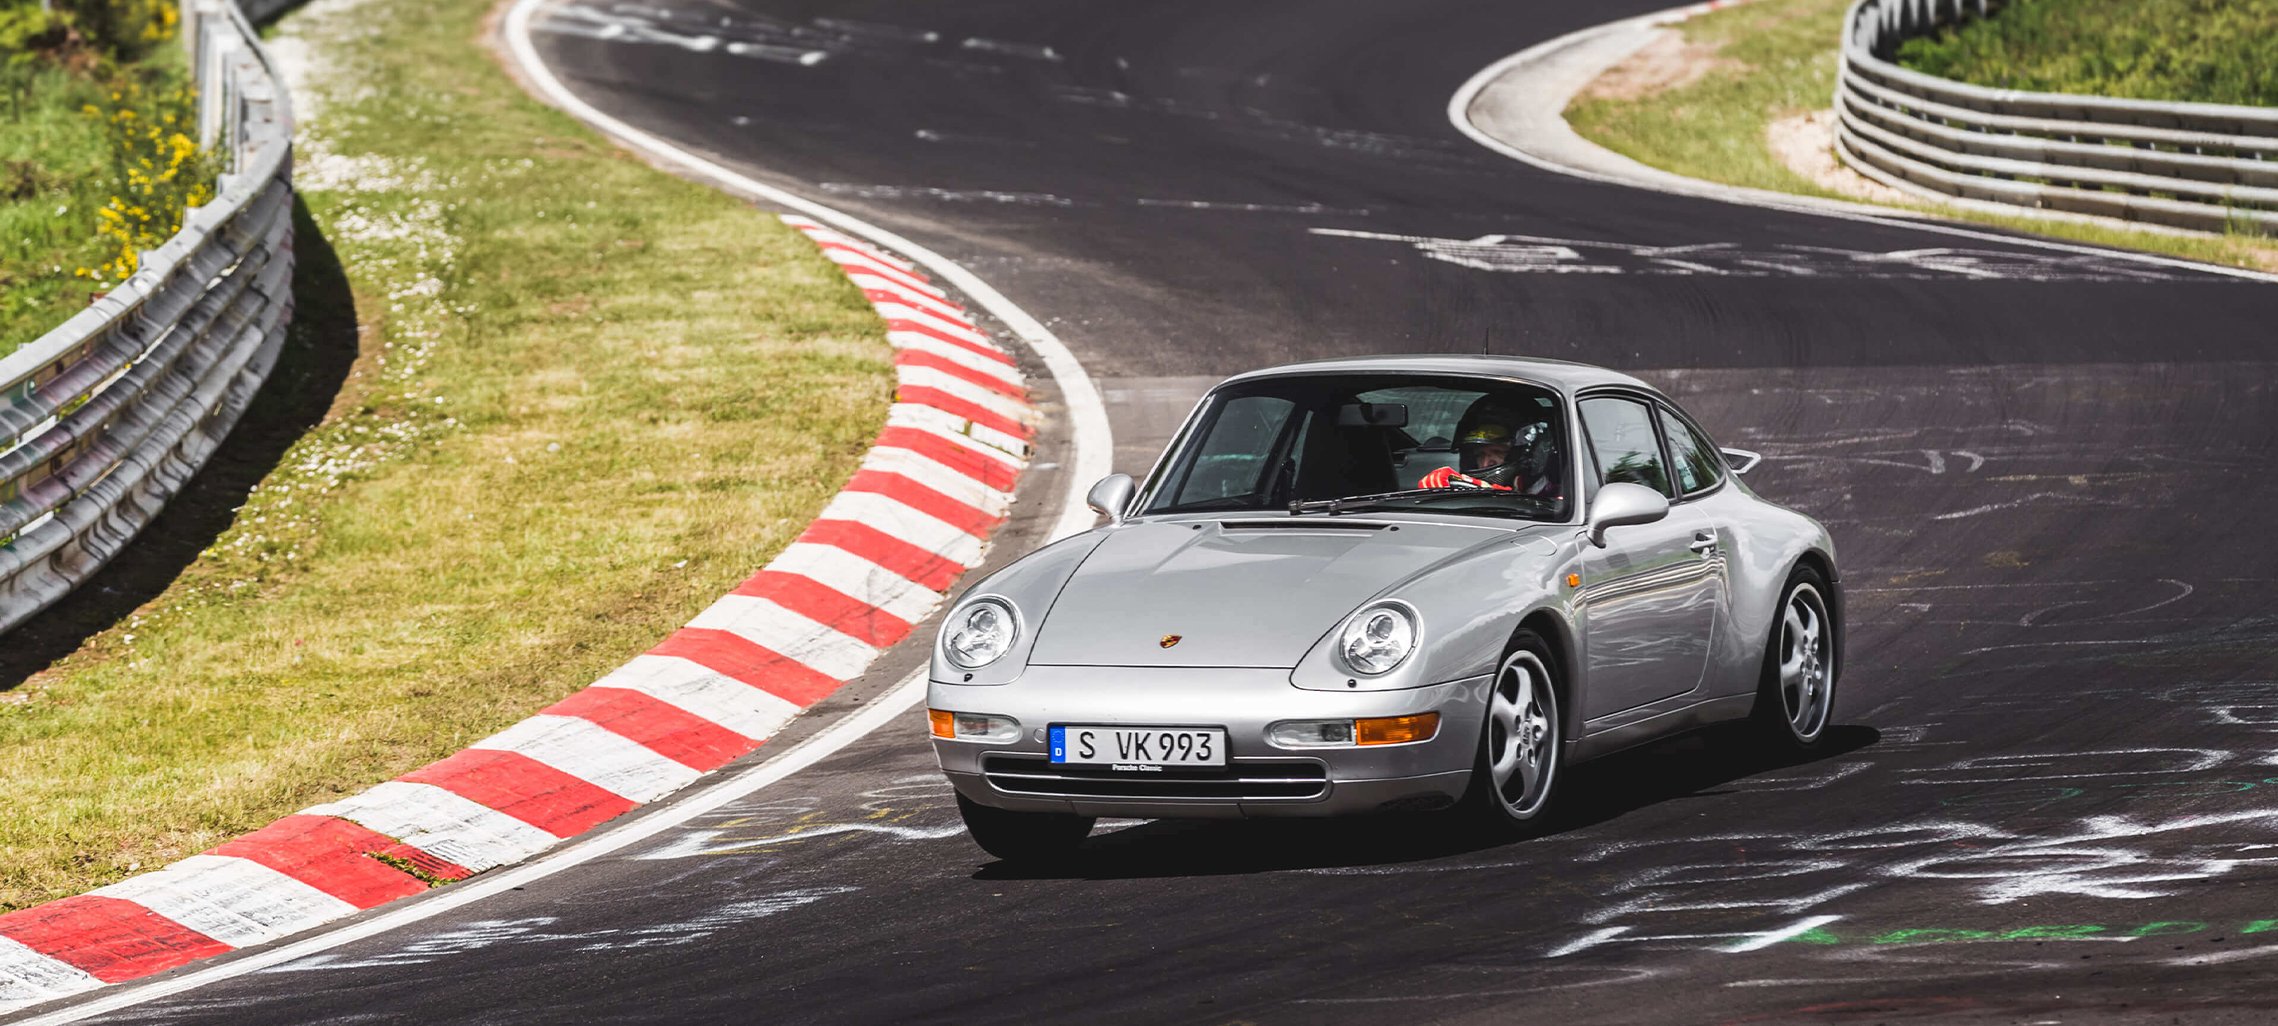 A Porsche on the race track at a trackday